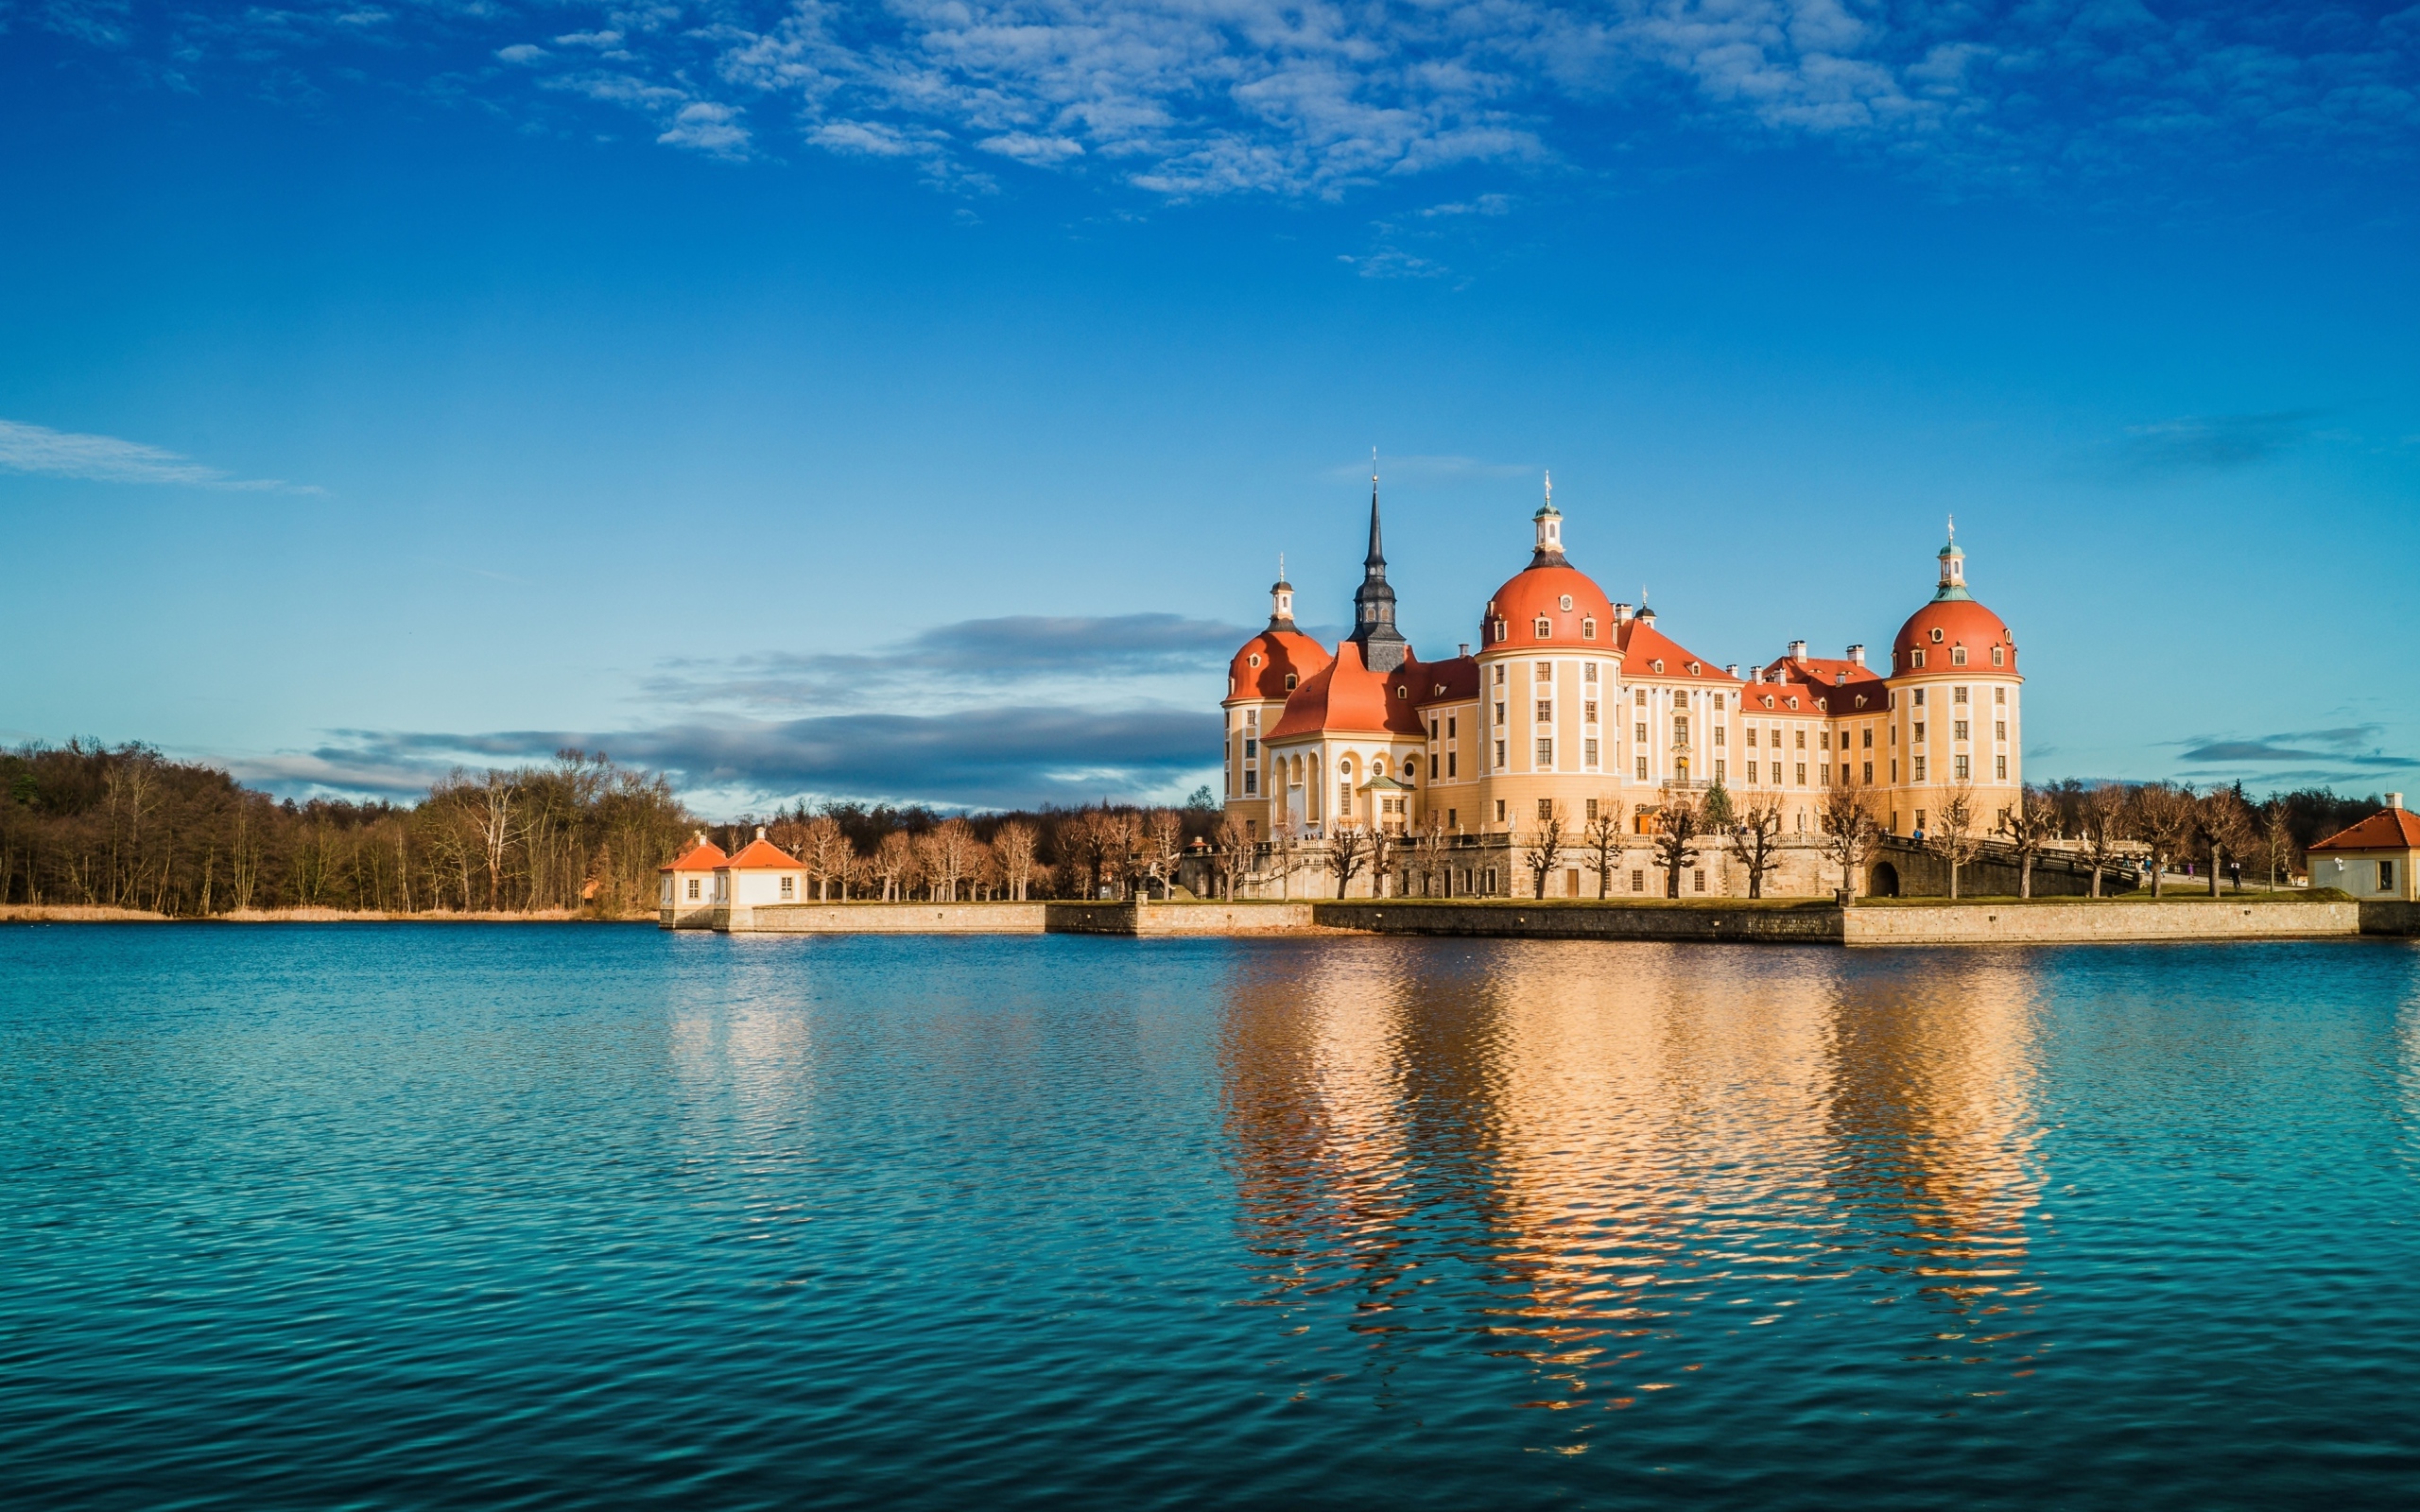 Moritzburg Castle by the Lake under the beautiful blue sky, Germany